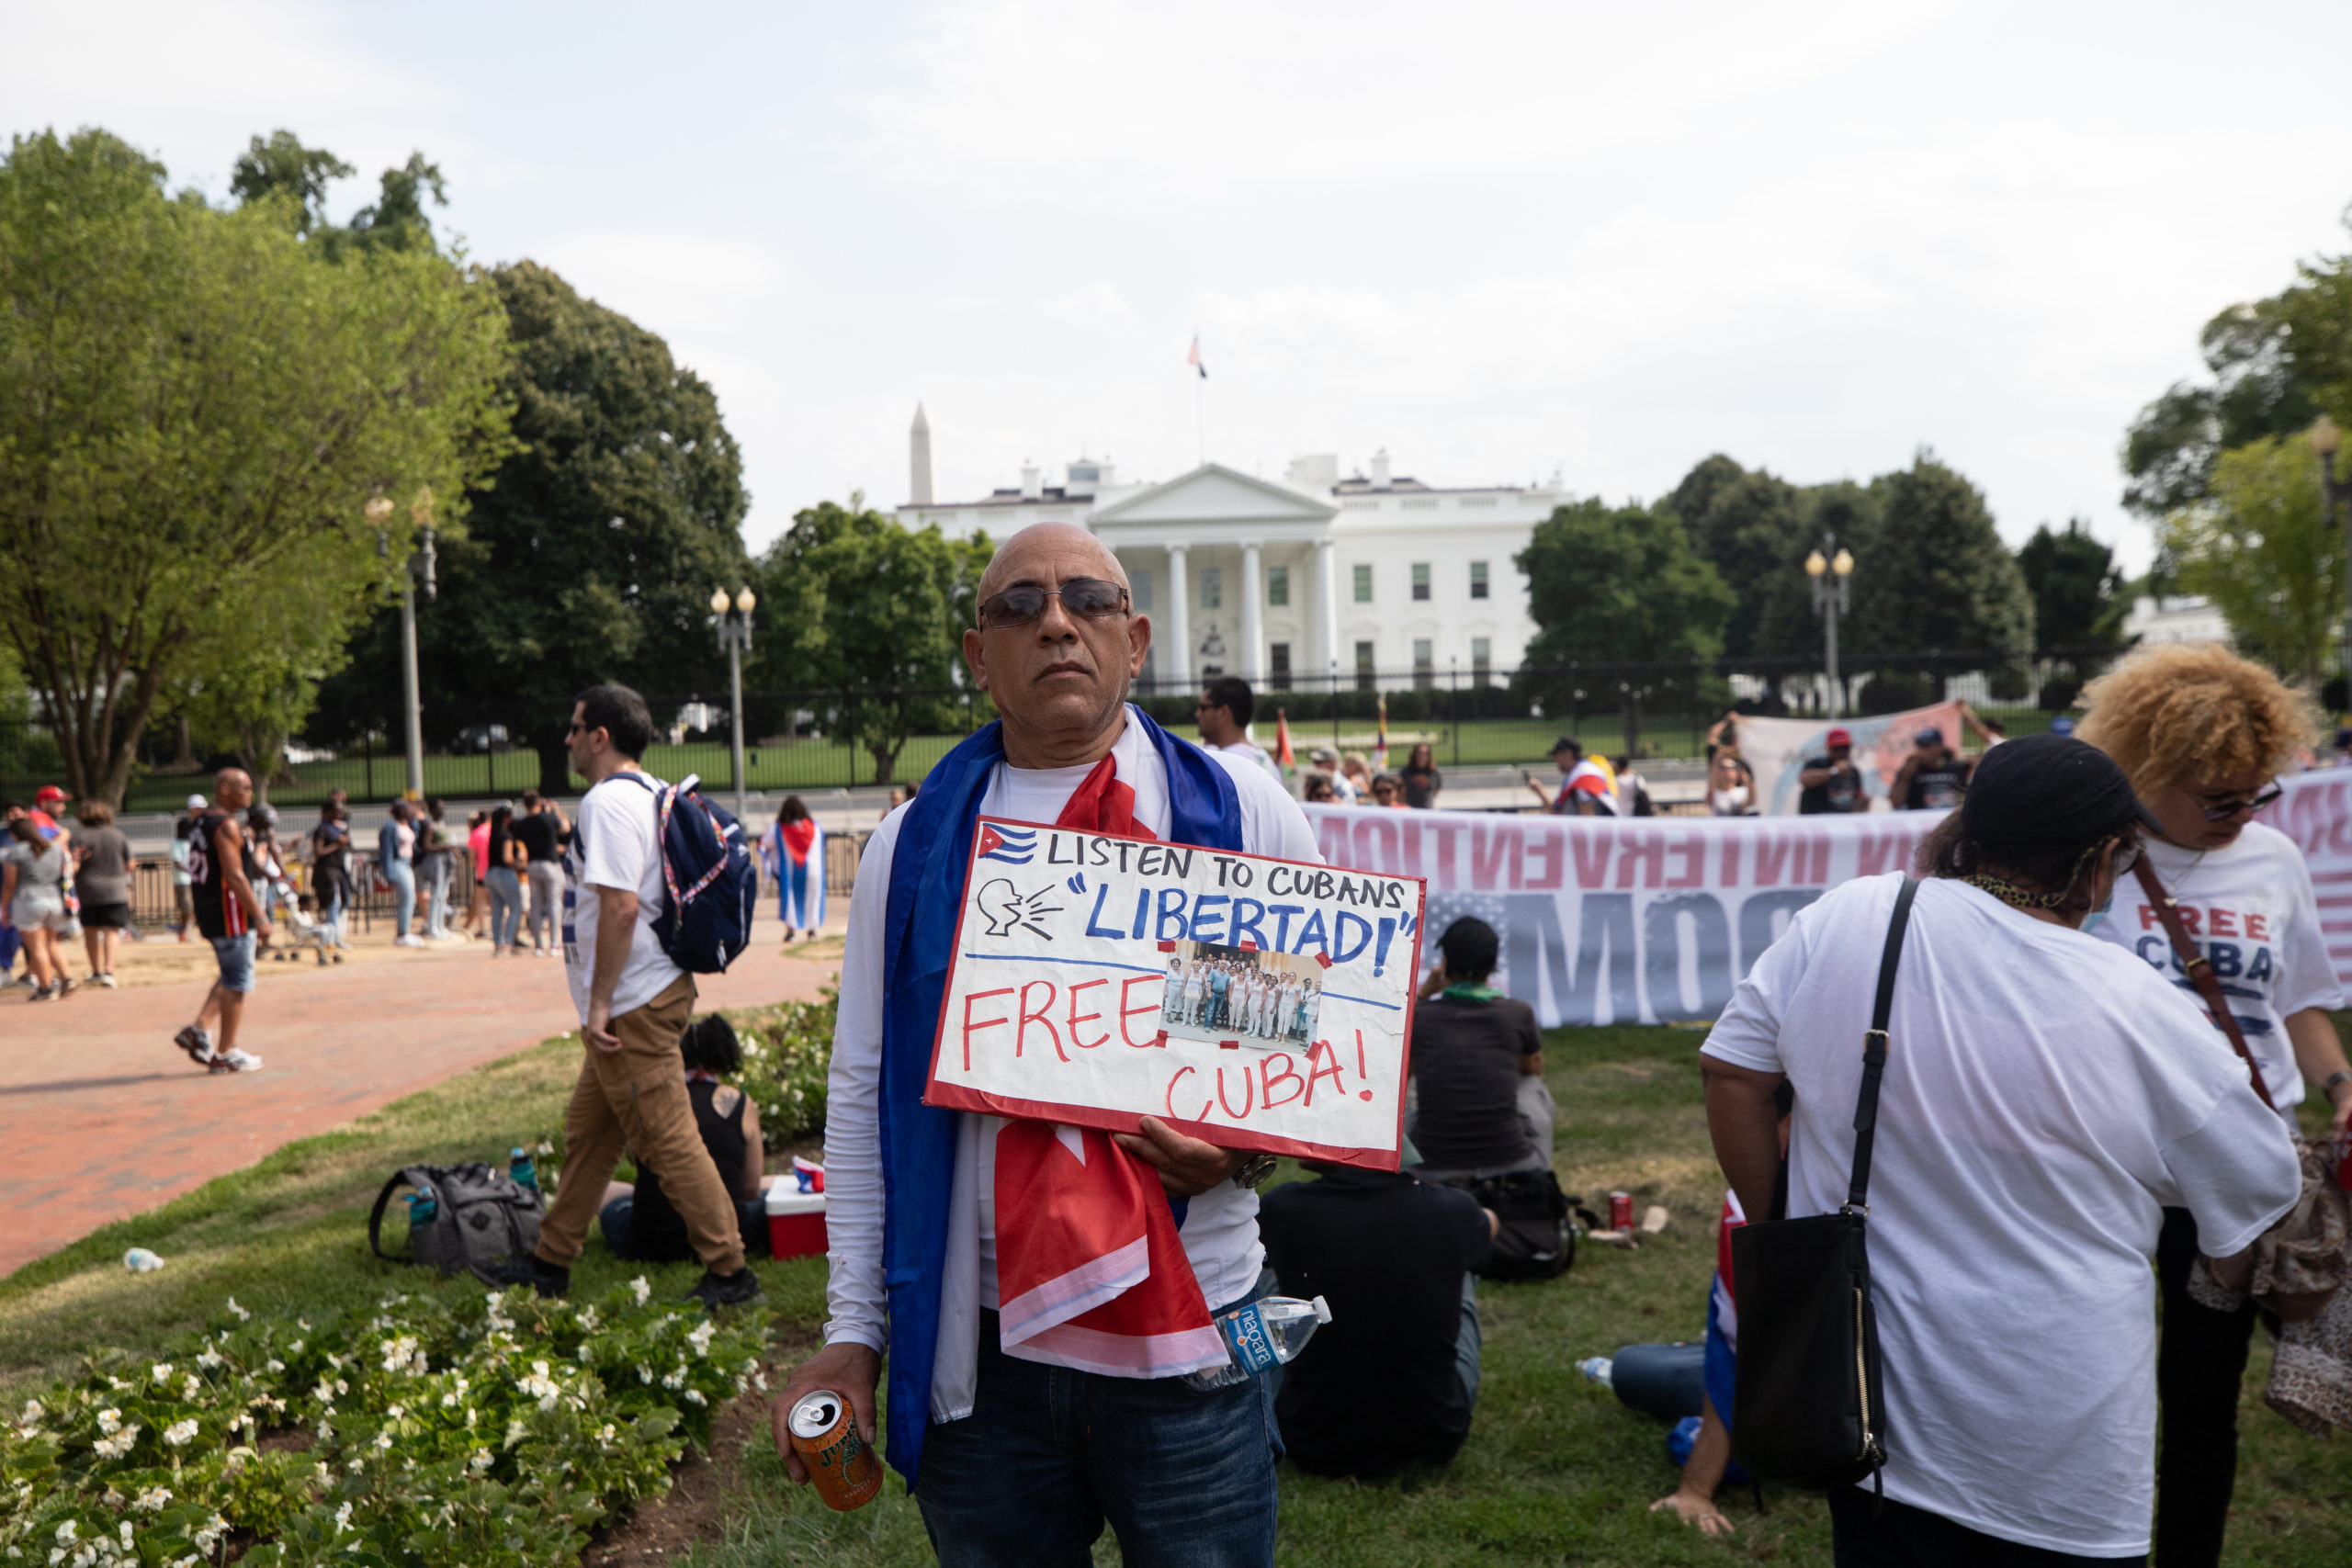  Demonstrators participated in a rally for Cuban freedom near the White House where attendees asked President Joe Biden to intervene and end communist rule over the country, in Washington, D.C. on July 26, 2021. (Kaylee Greenlee - Daily Caller News Foundation)